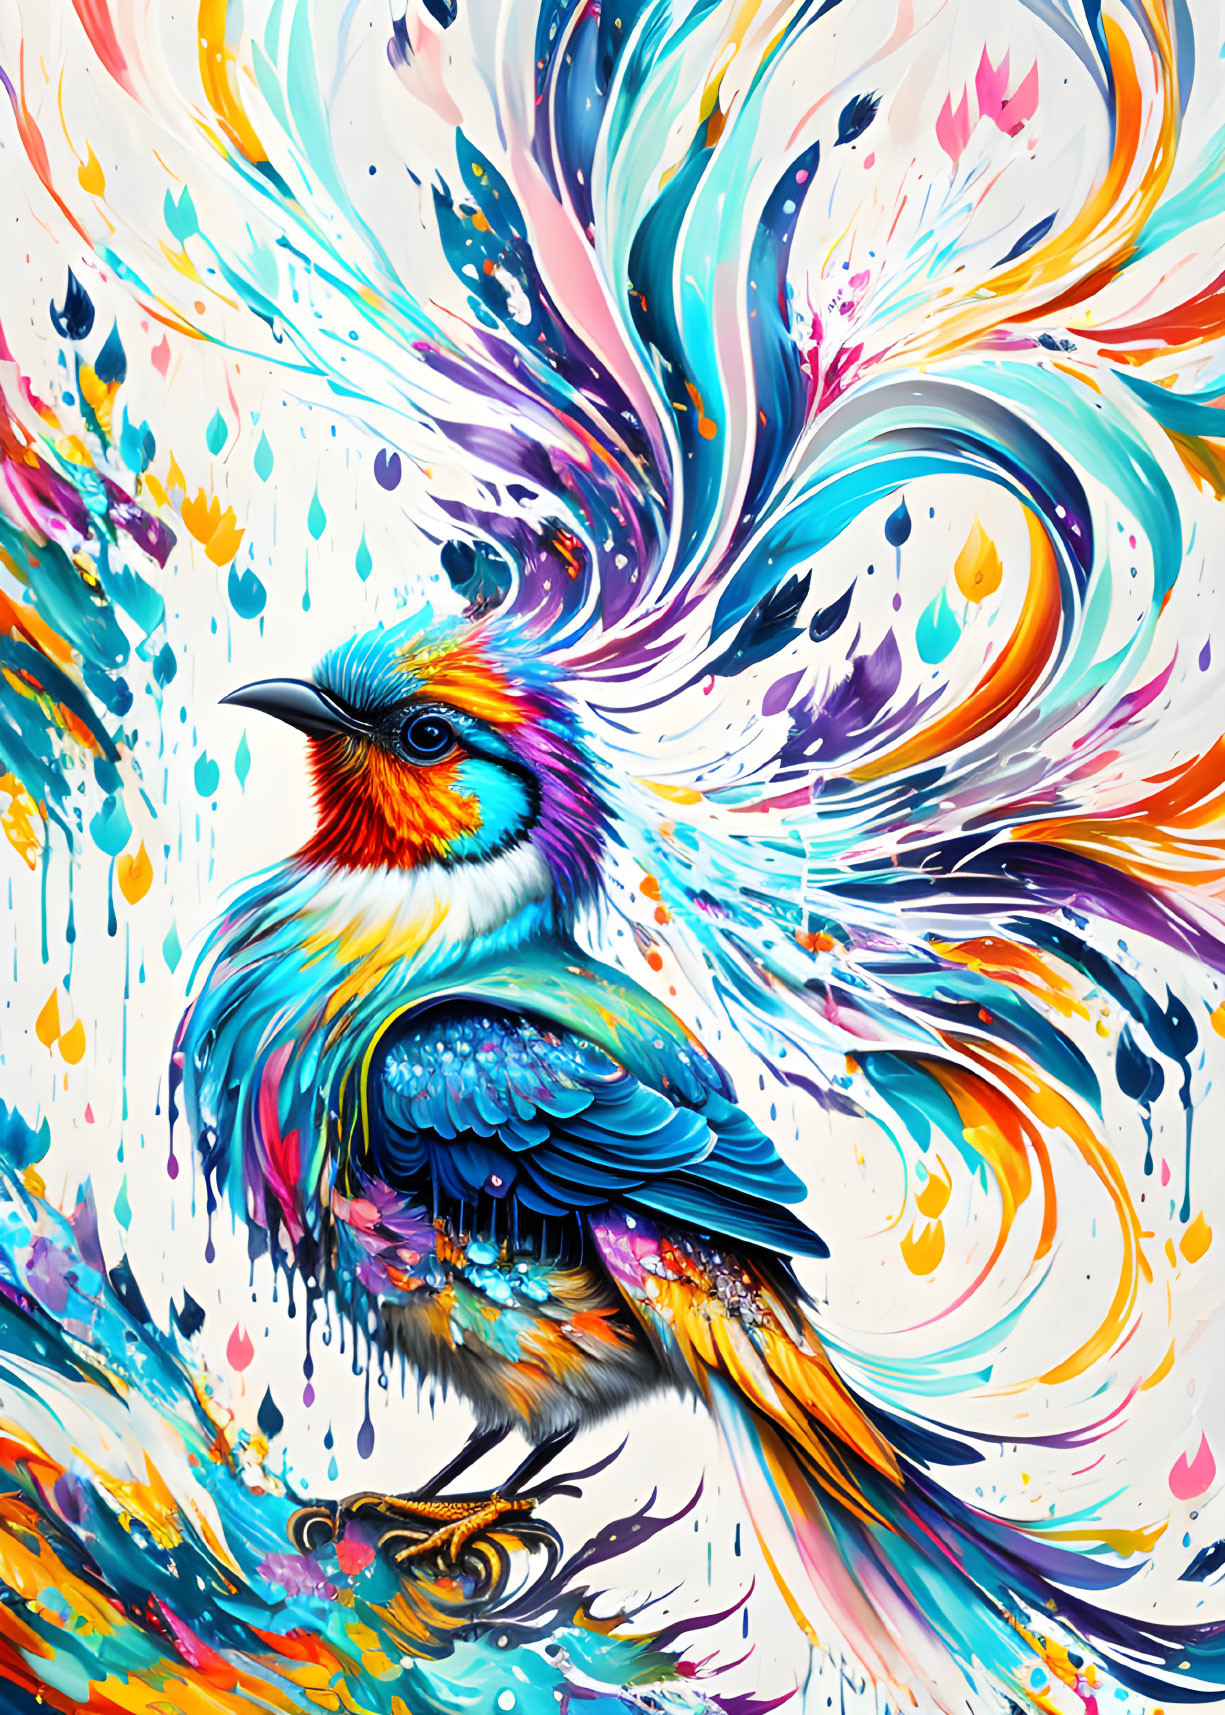 Colorful Abstract Bird Illustration with Flowing Feathers in Dynamic Colors